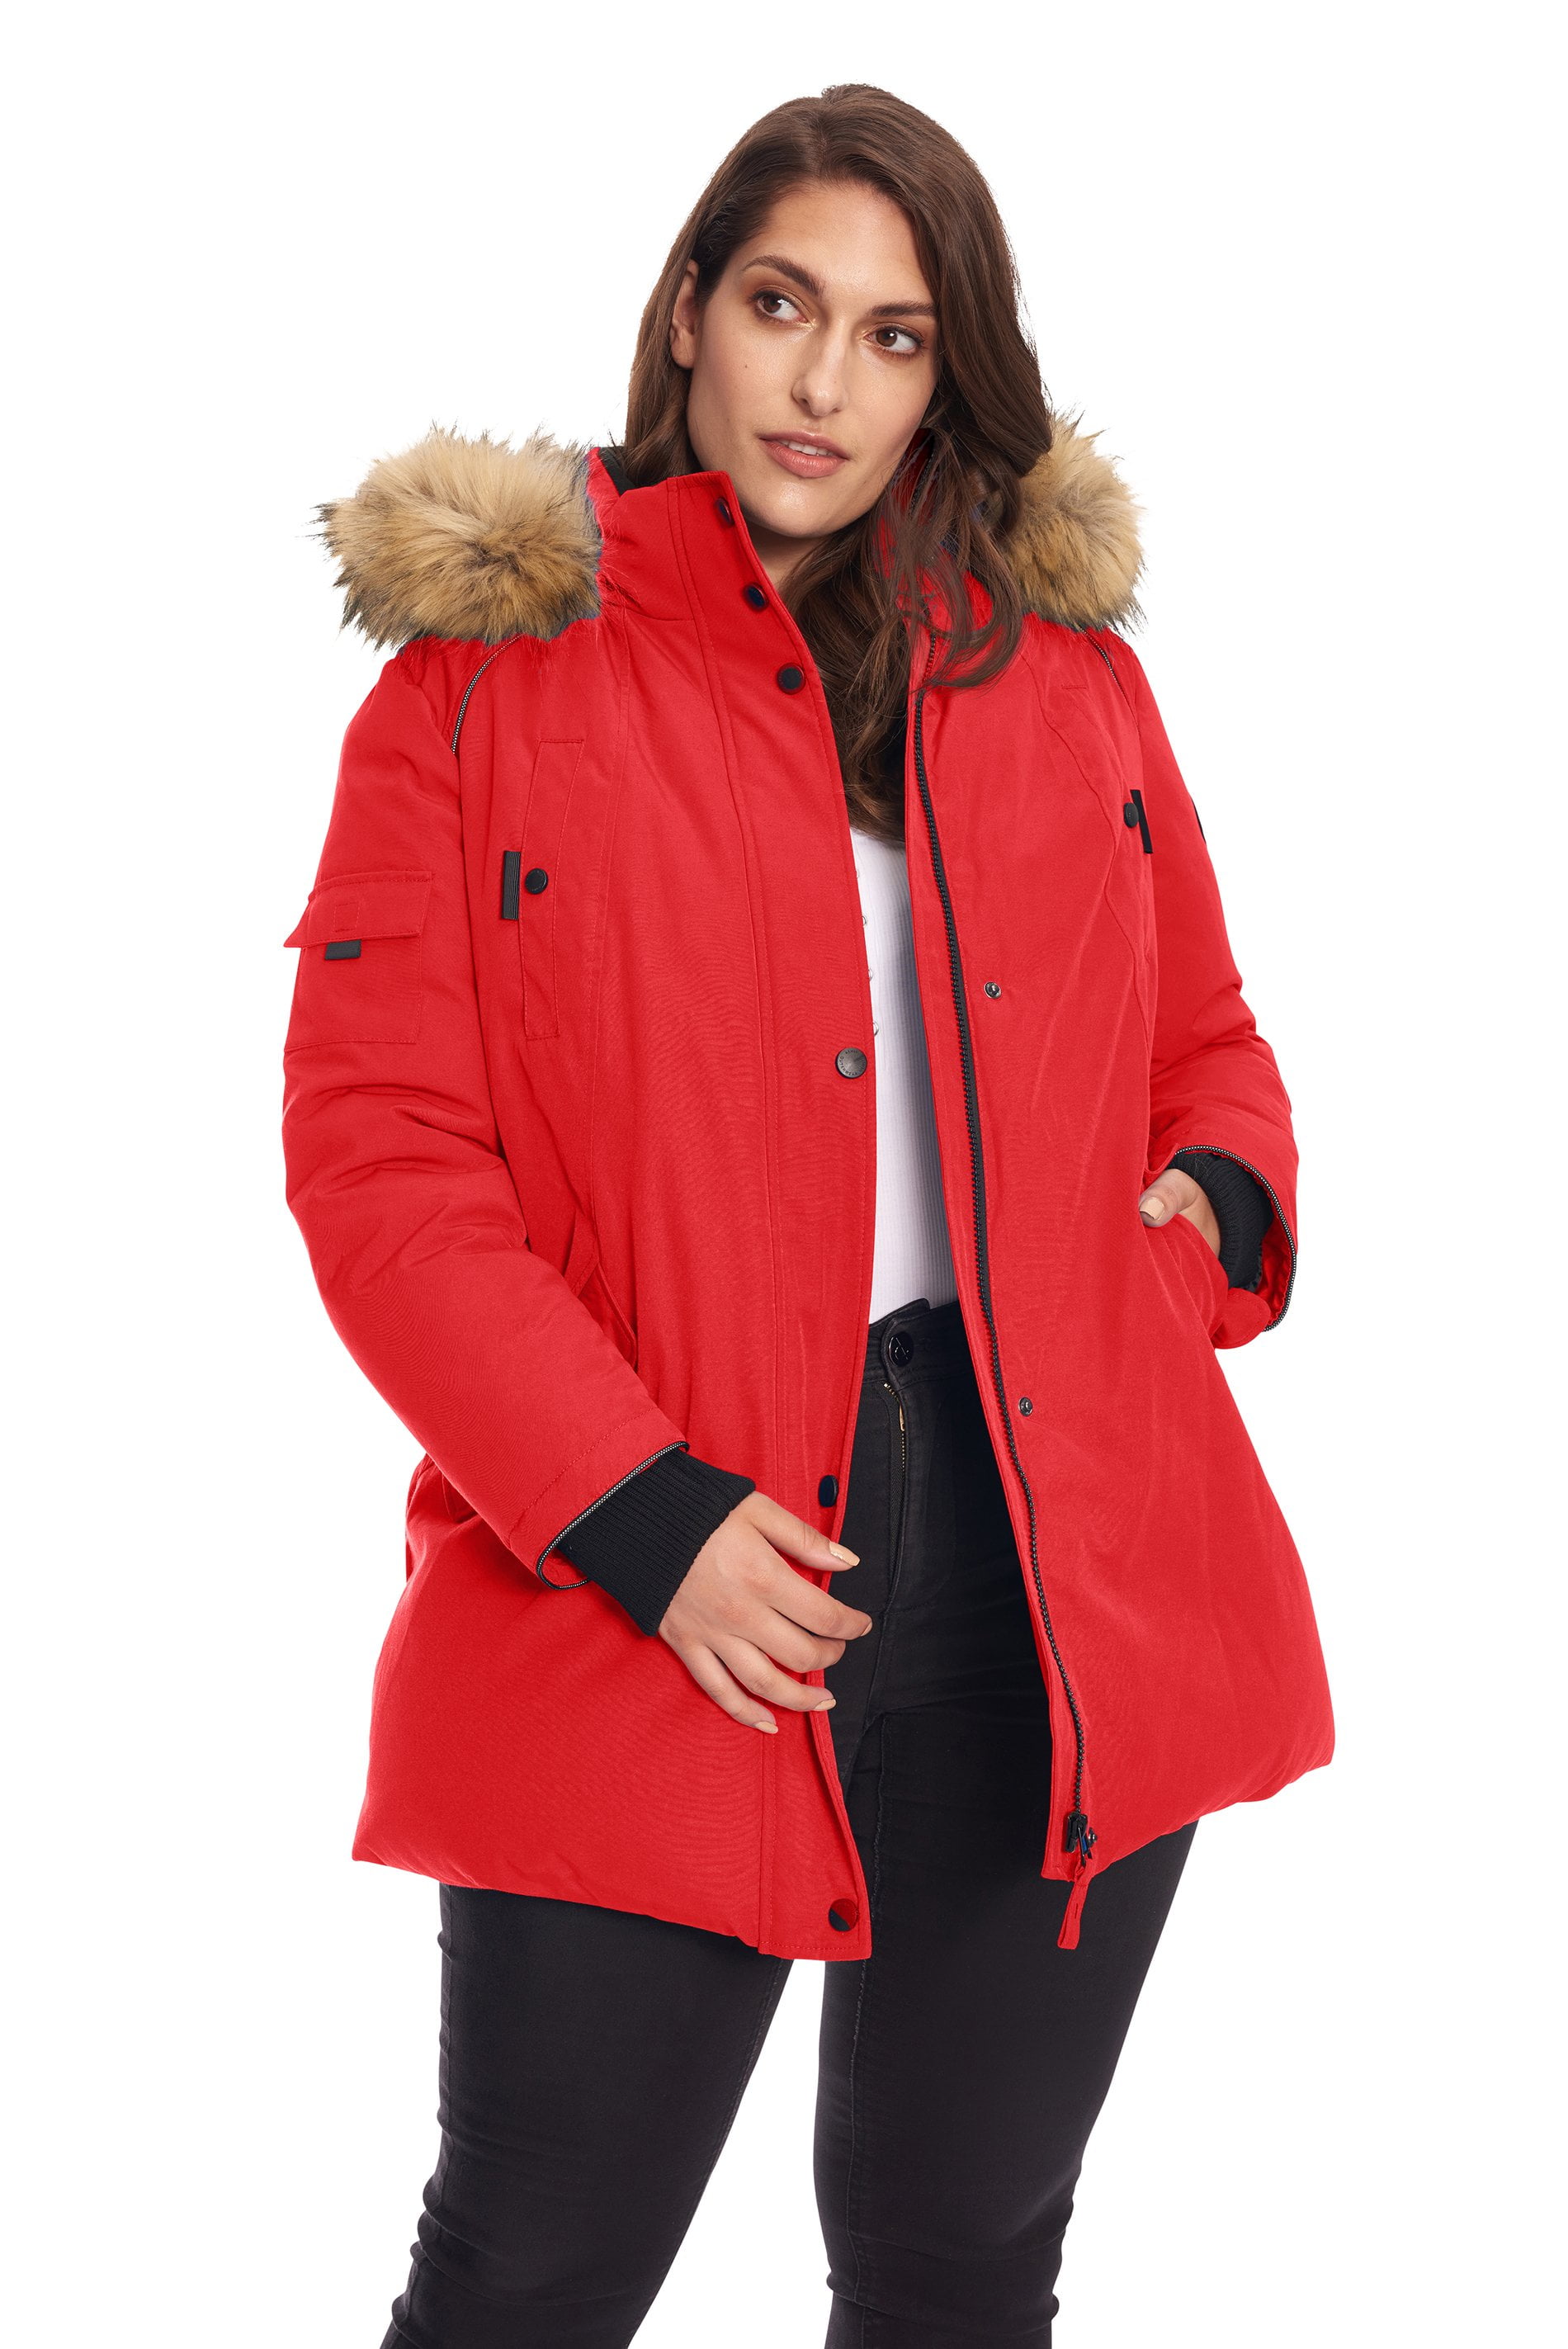 Soularge Women's Winter Plus Size Thickened Cotton Coat with Detachable  Hood(Red,6X) 